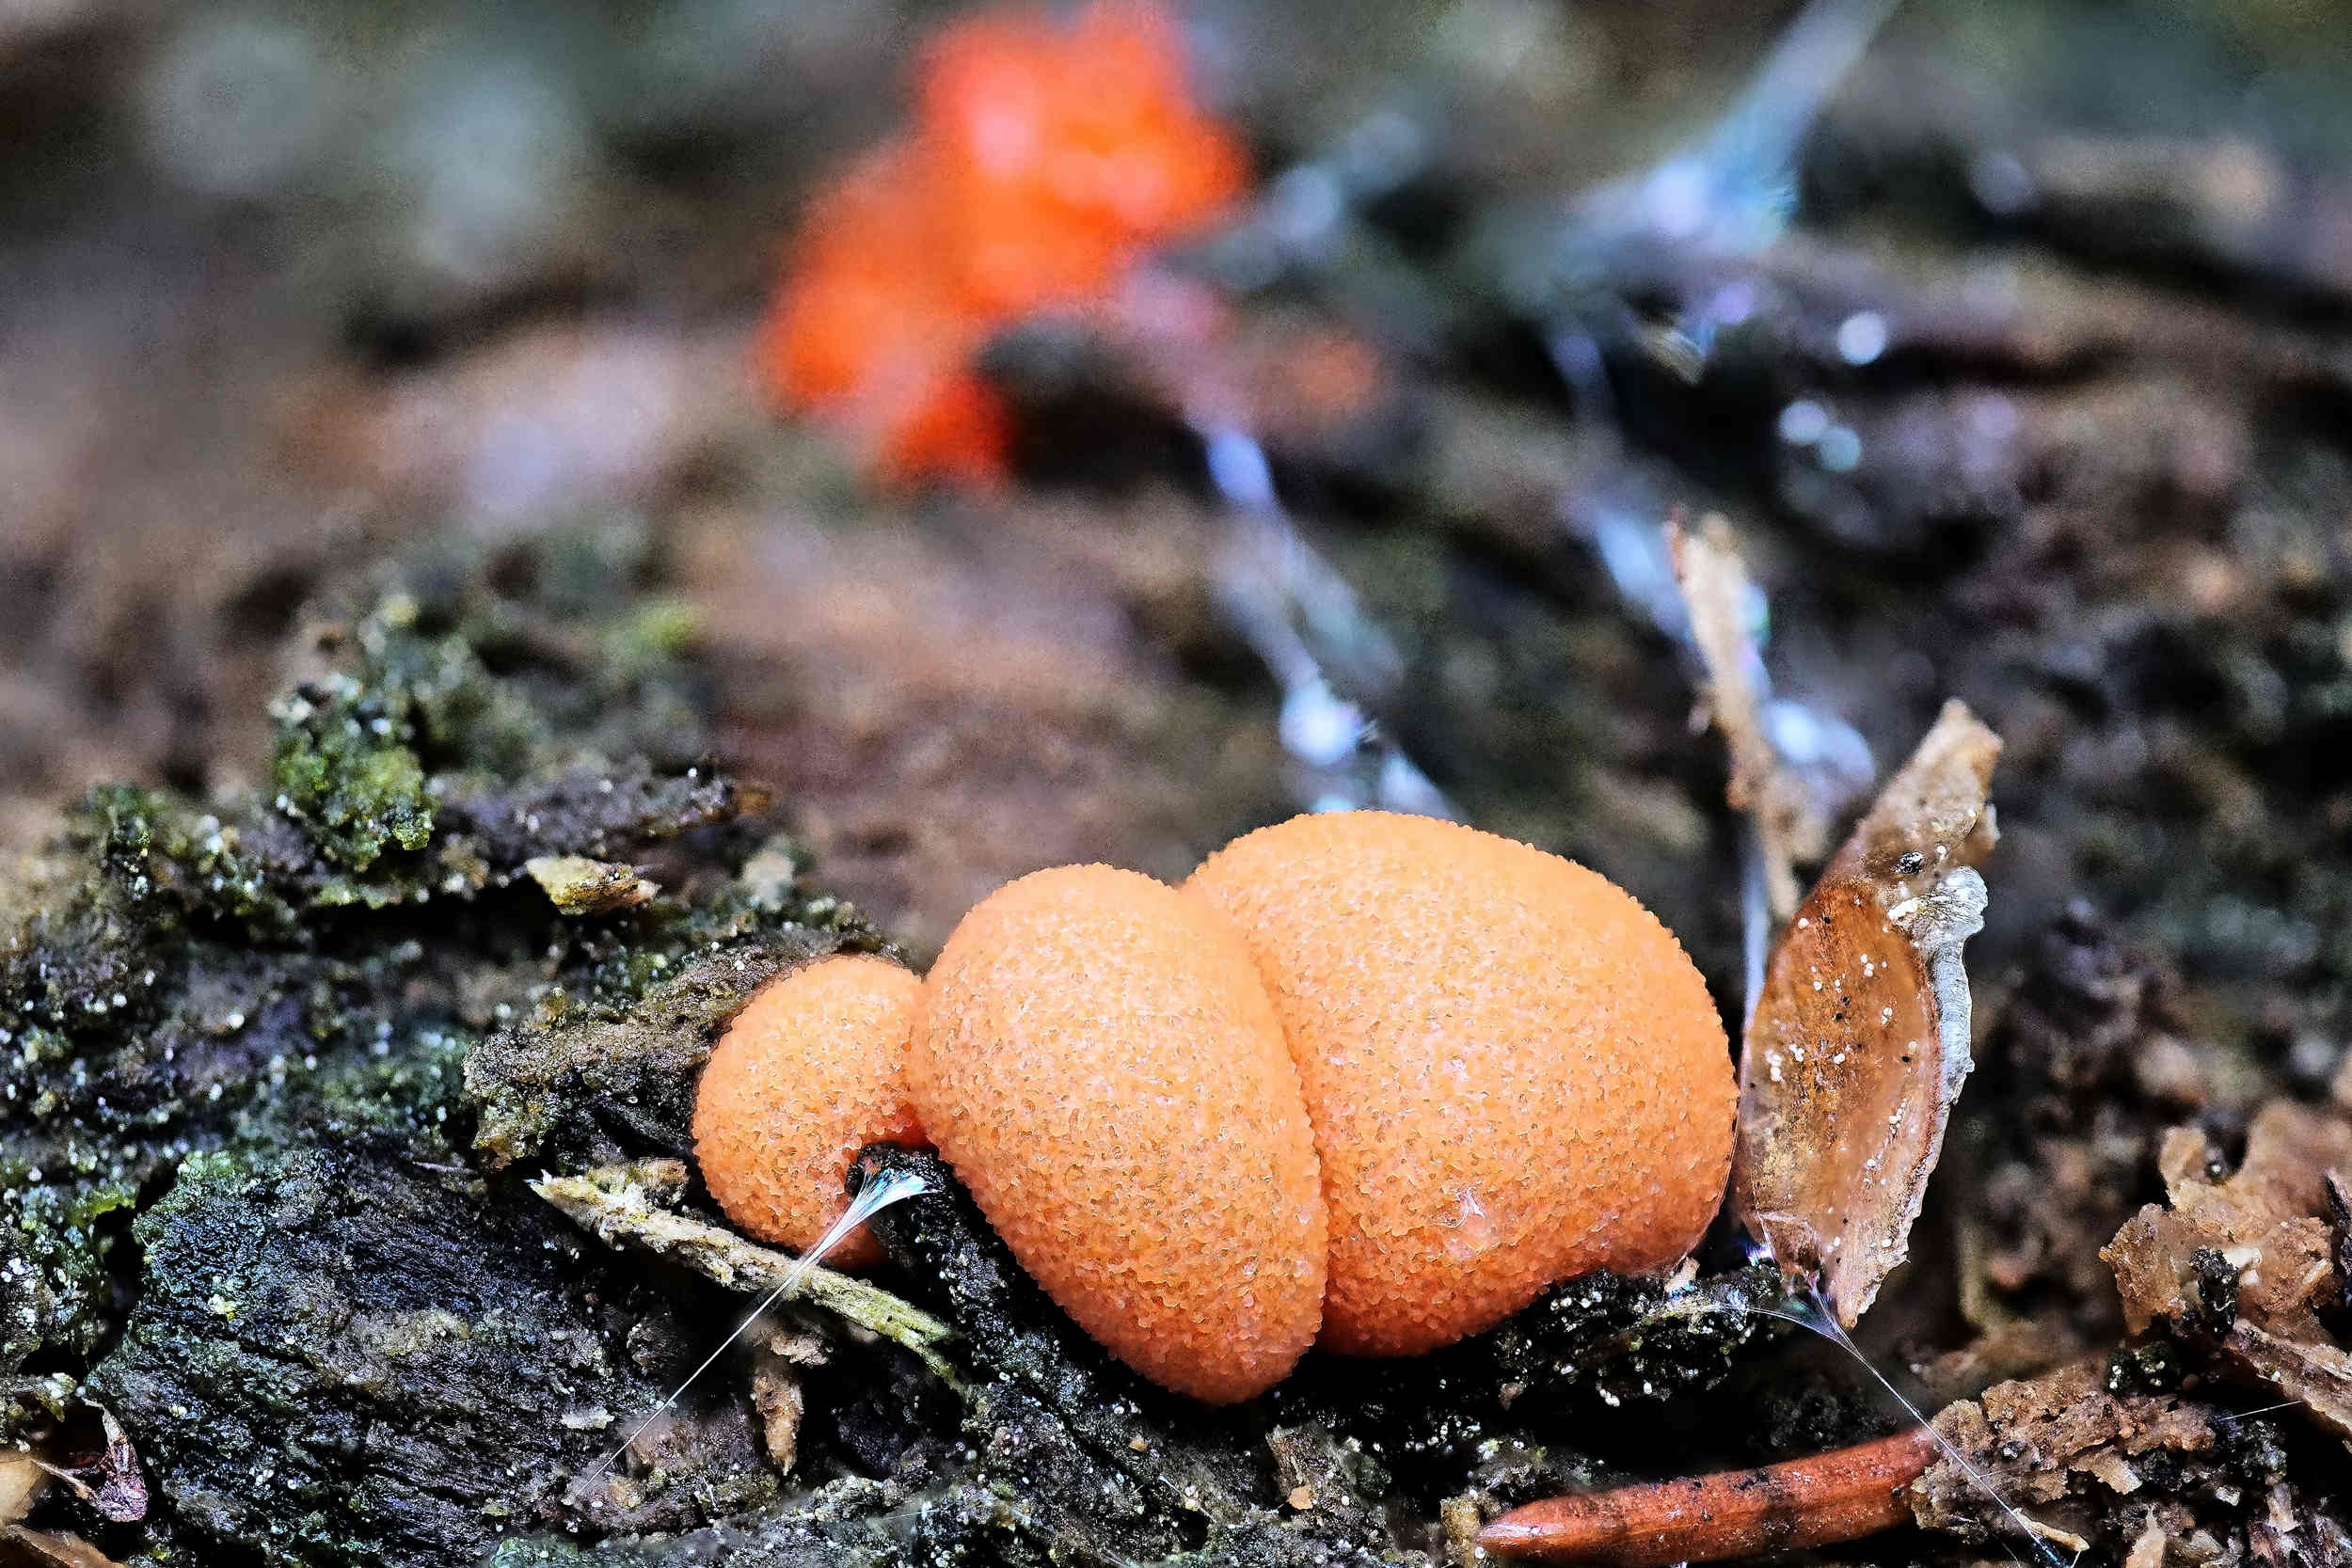 Lycogala epidendrum – Blutmilchpilz